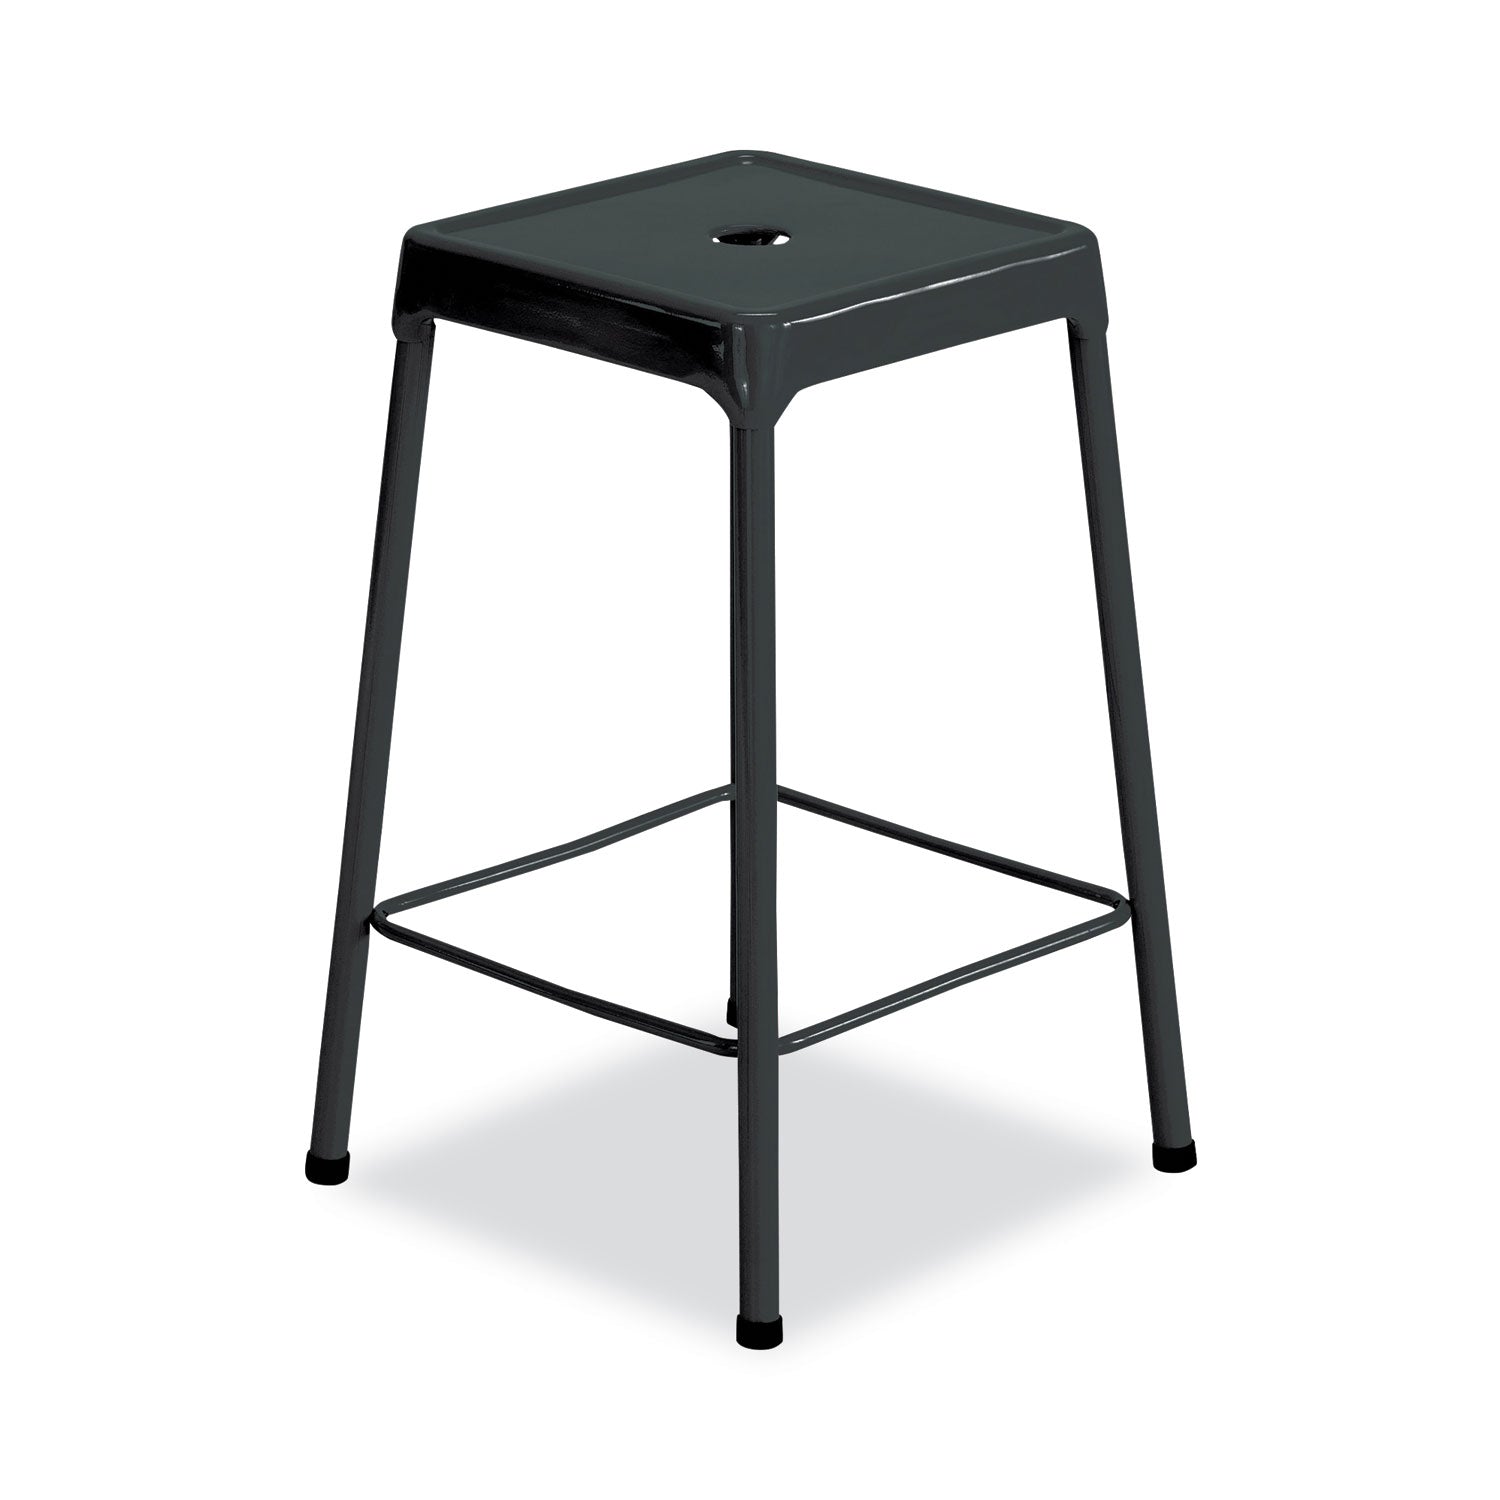 Counter-Height Steel Stool, Backless, Supports Up to 250 lb, 25" Seat Height, Black - 